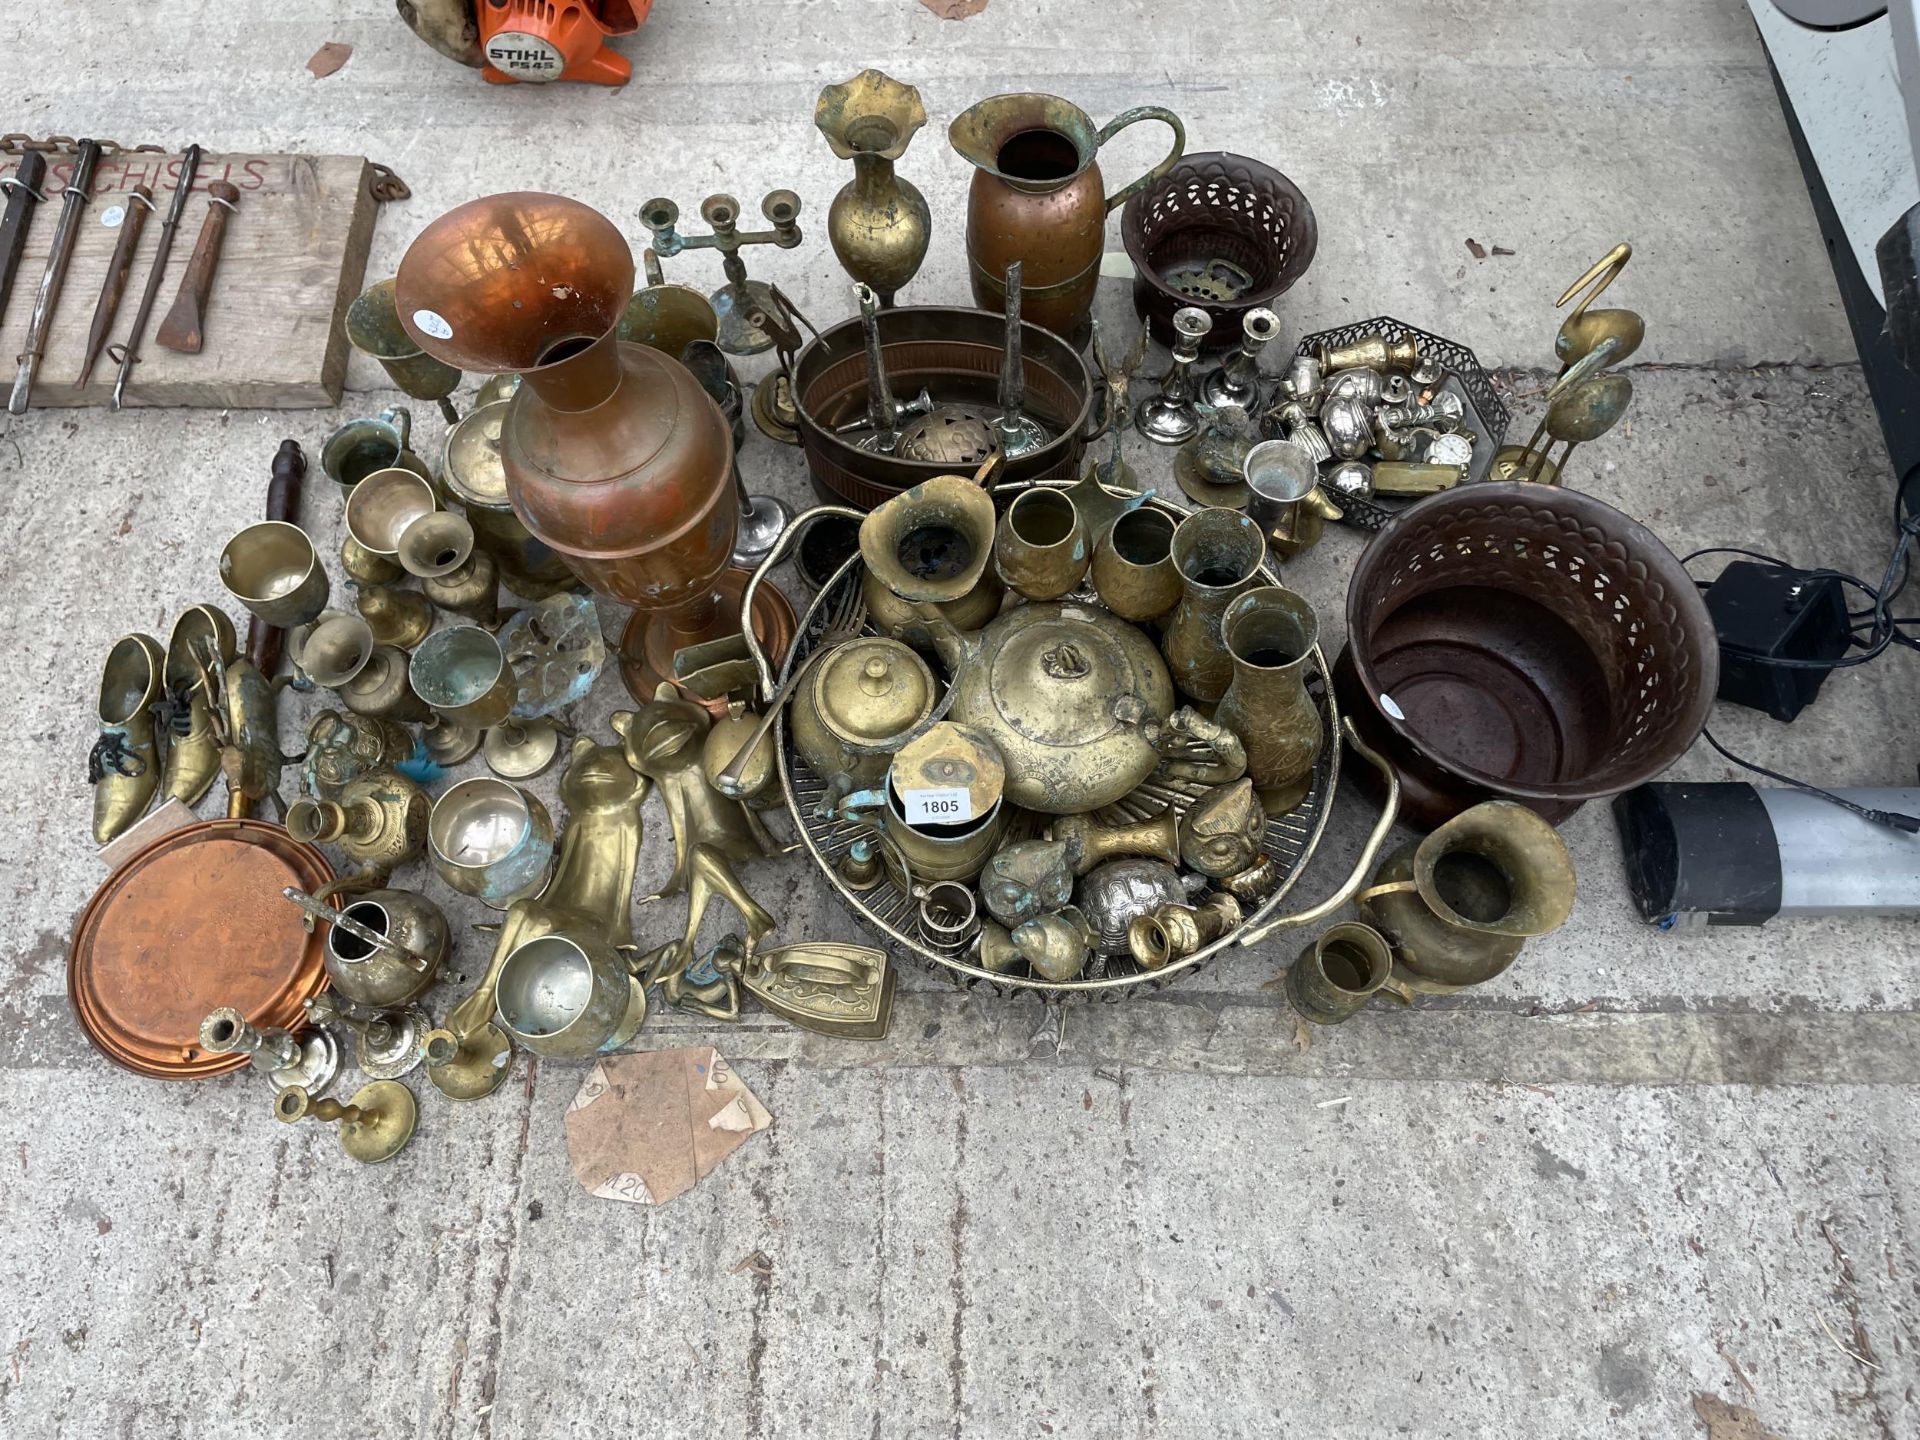 A LARGE ASSORTMENT OF METAL WARE ITEMS TO INCLUDE A COPPER VASE, BRASS GOBLETS AND BRASS FIGURES ETC